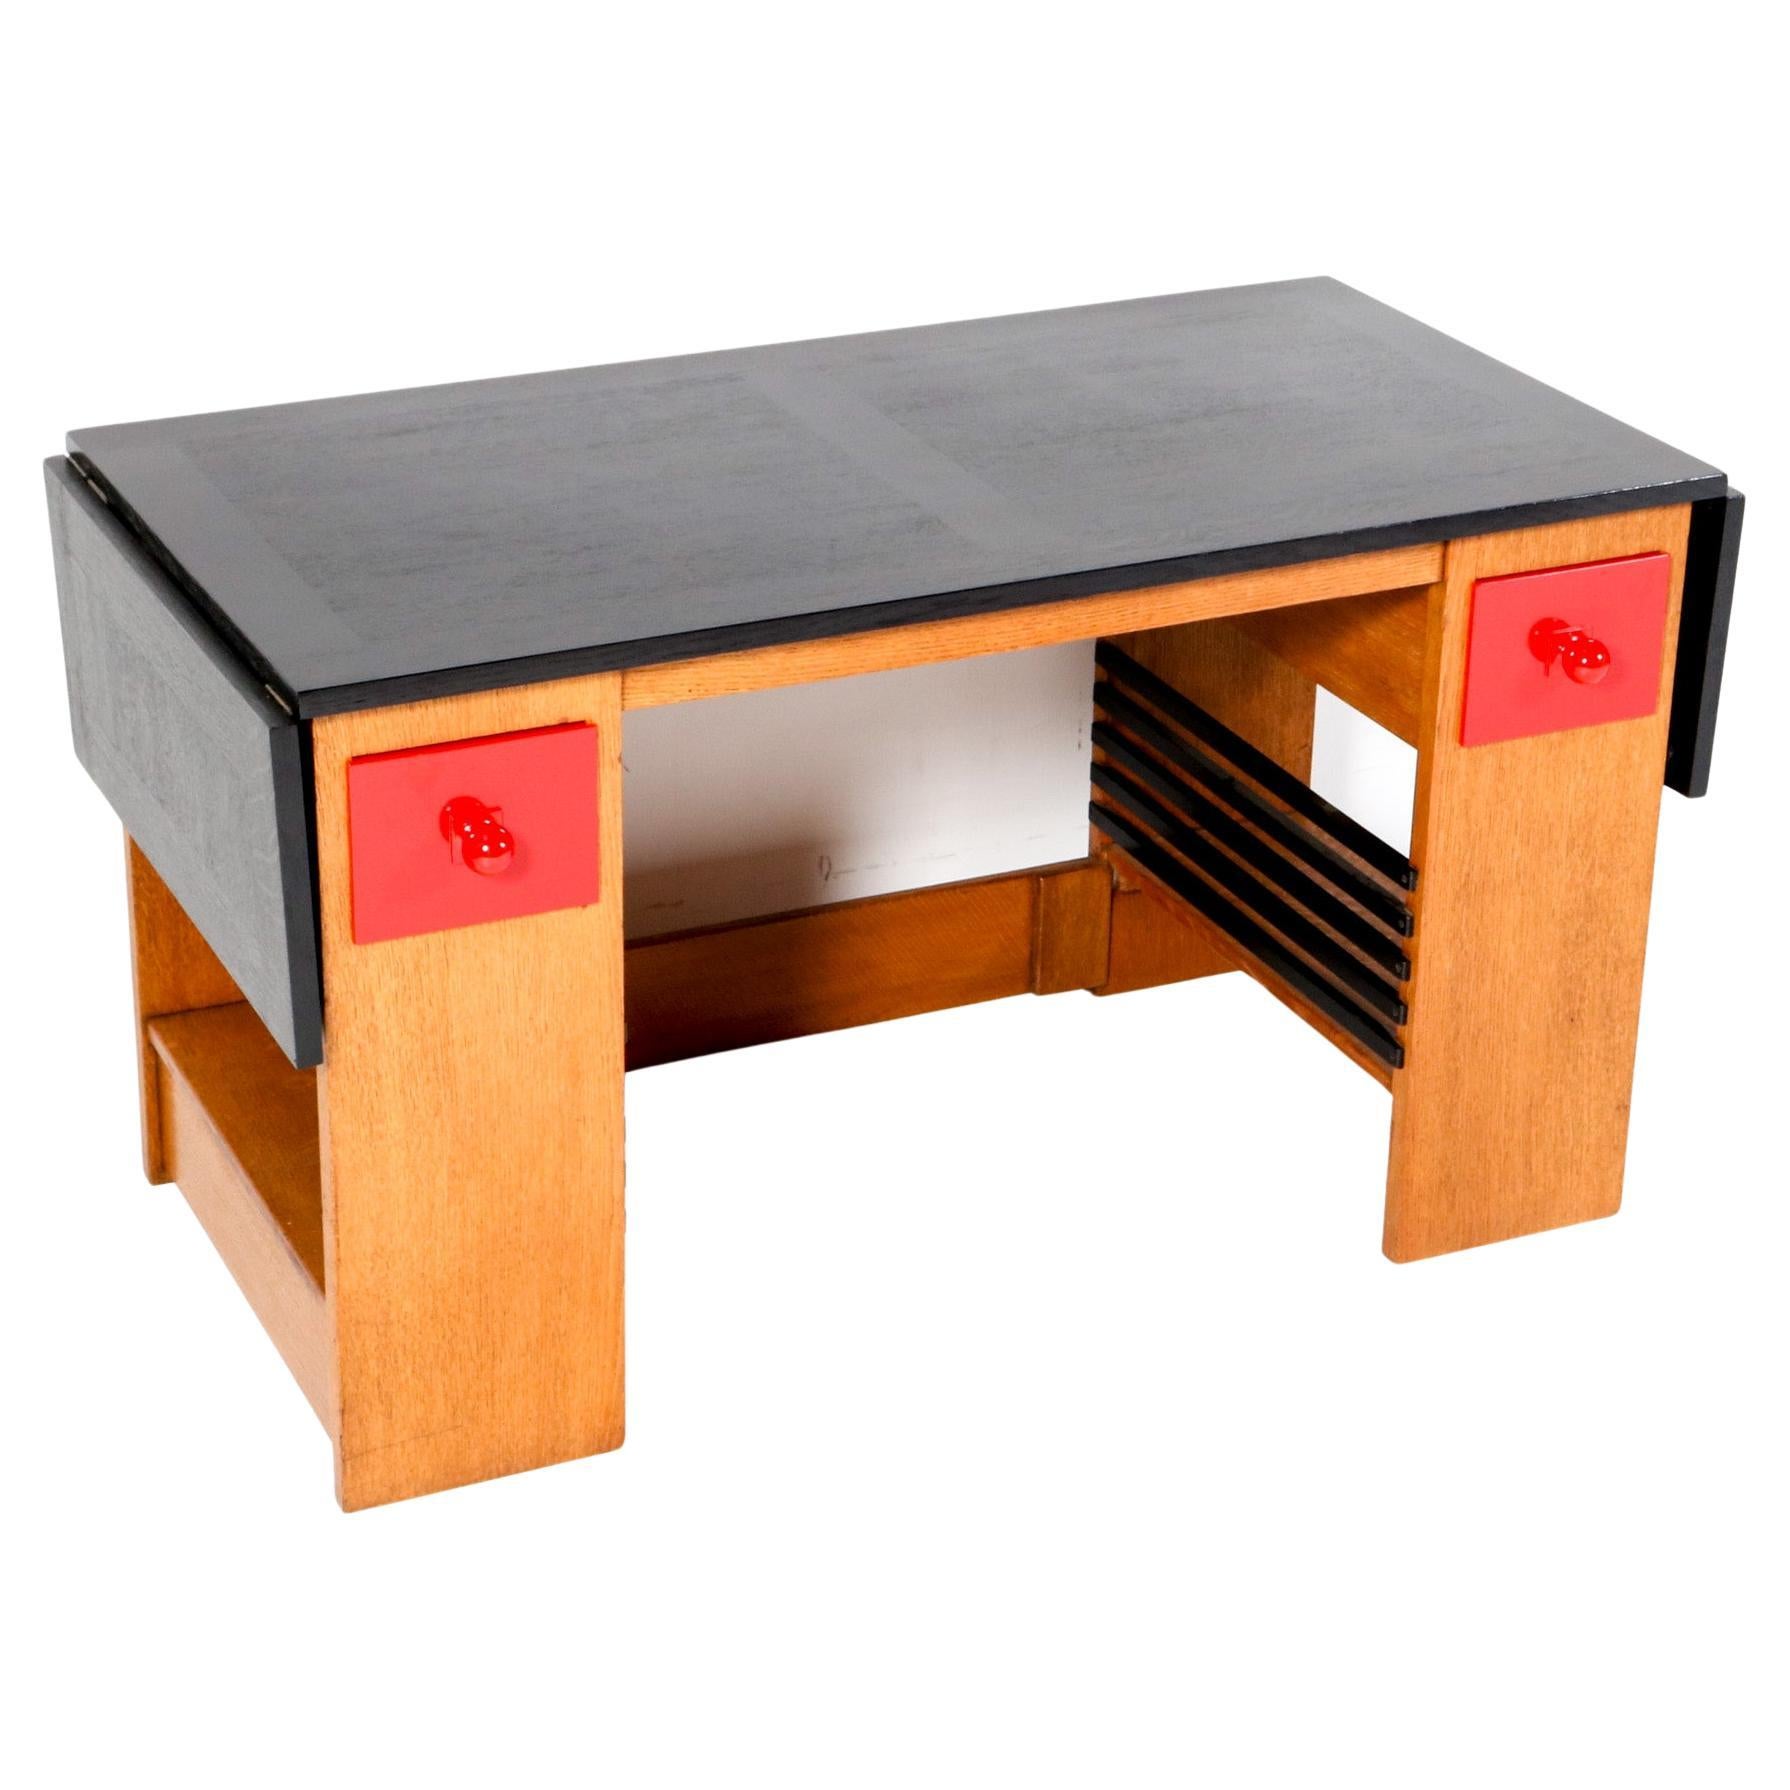 H.Pander & Zonen Desks and Writing Tables